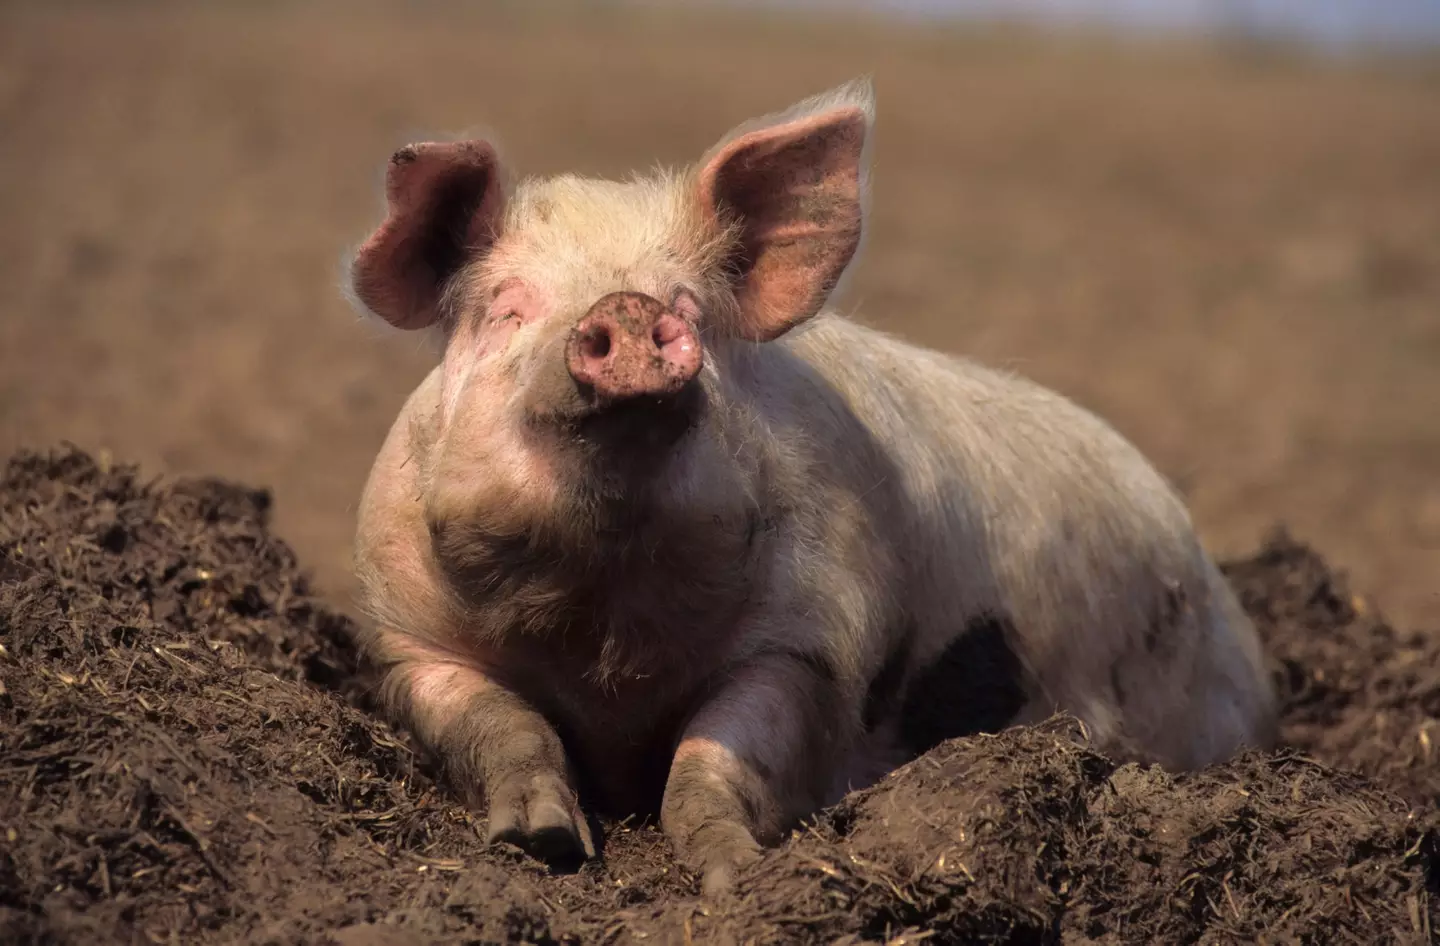 A depiction of a pig living its best life, like we hope that pig now is.